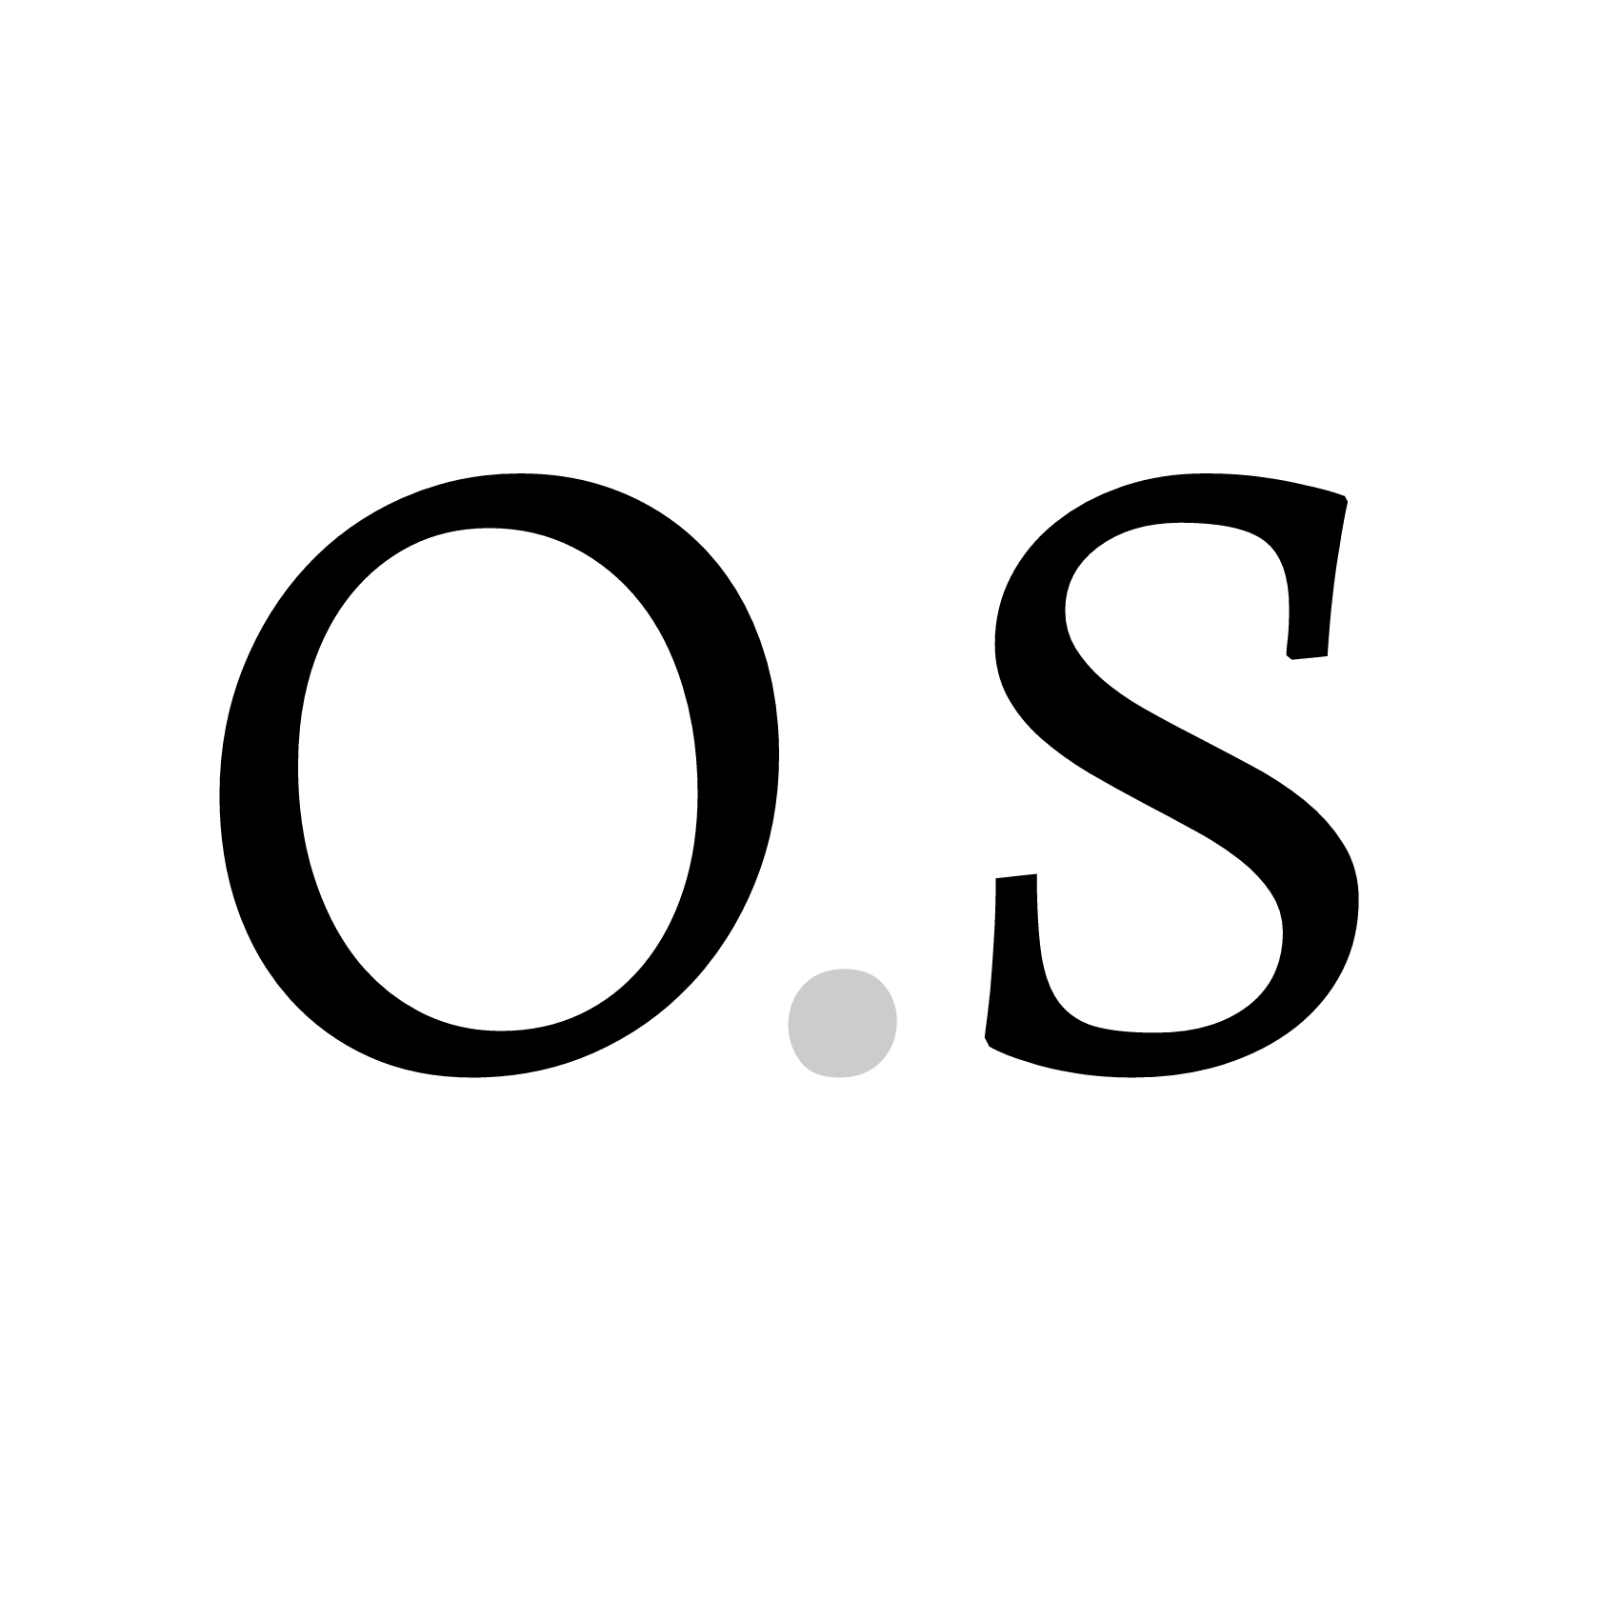 Obsidian Systems, Cardano Project Building Resources.